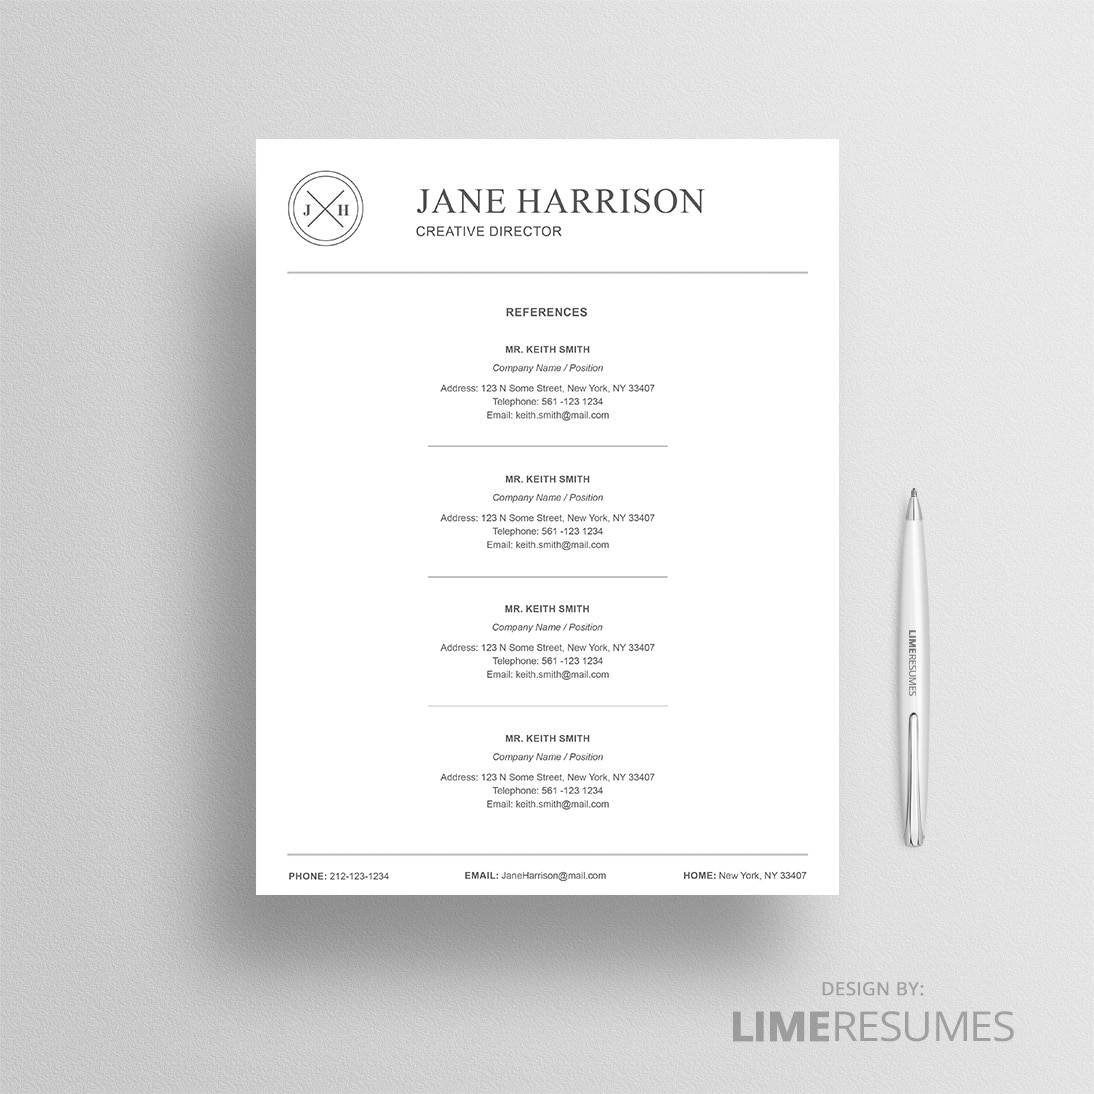 Resume Reference List Template from www.limeresumes.com